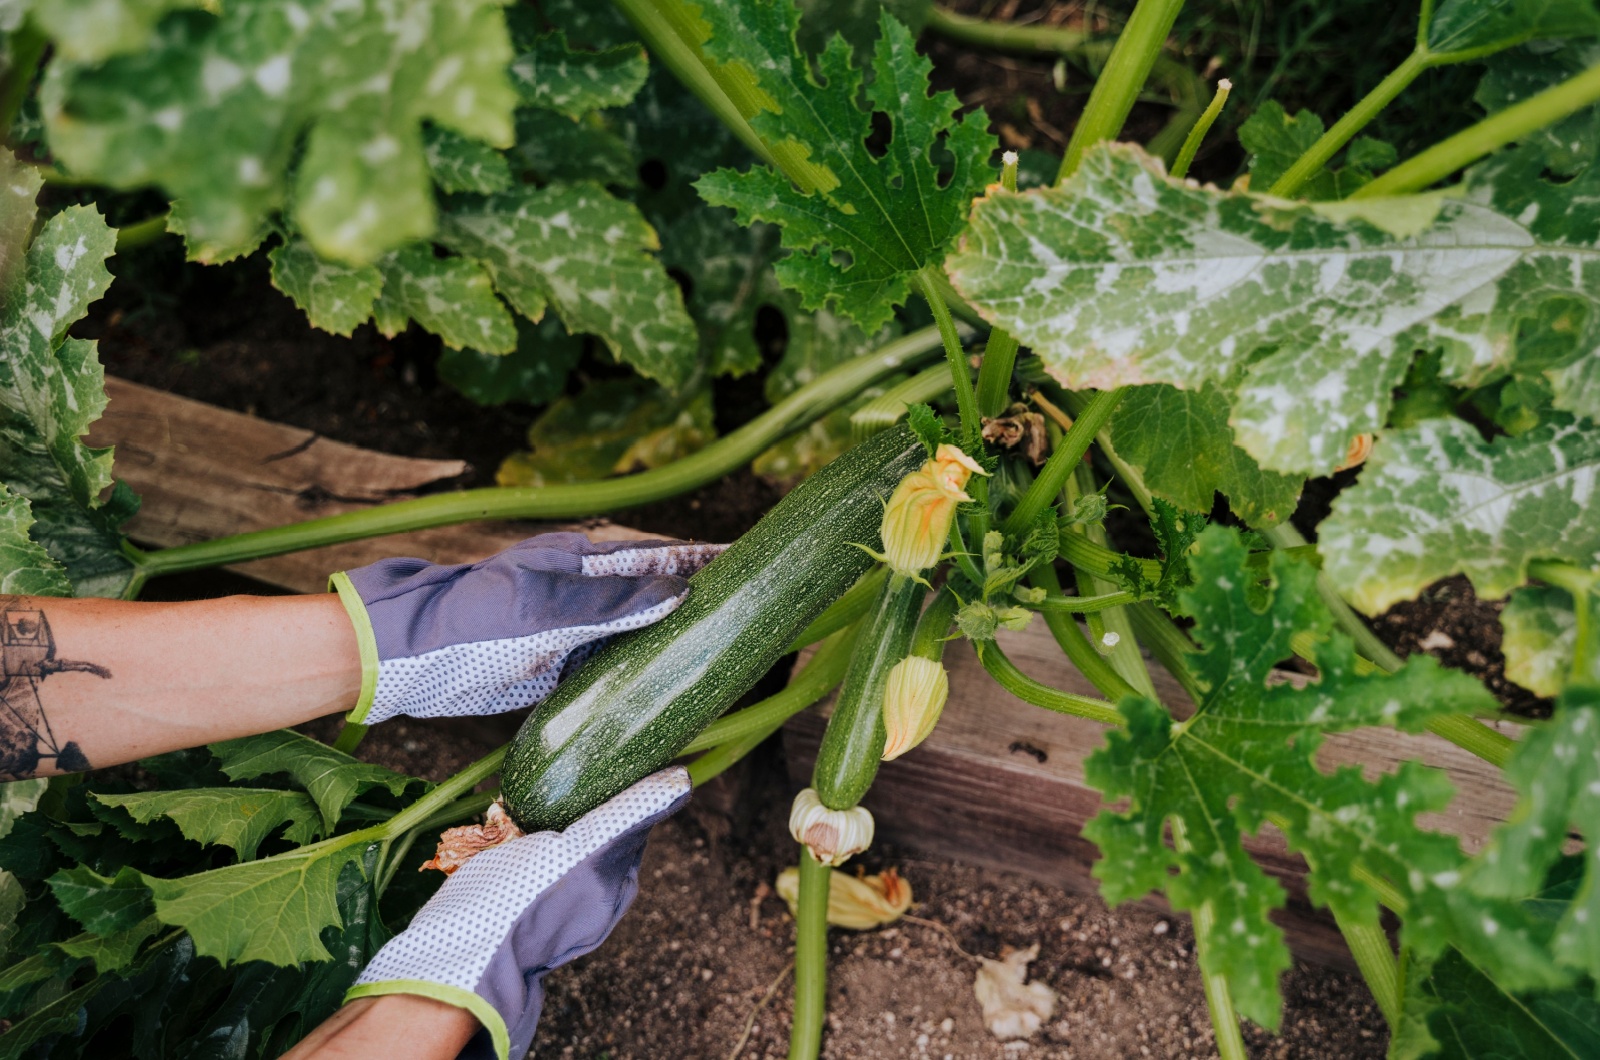 farmer picking zucchini from plant growing in garden